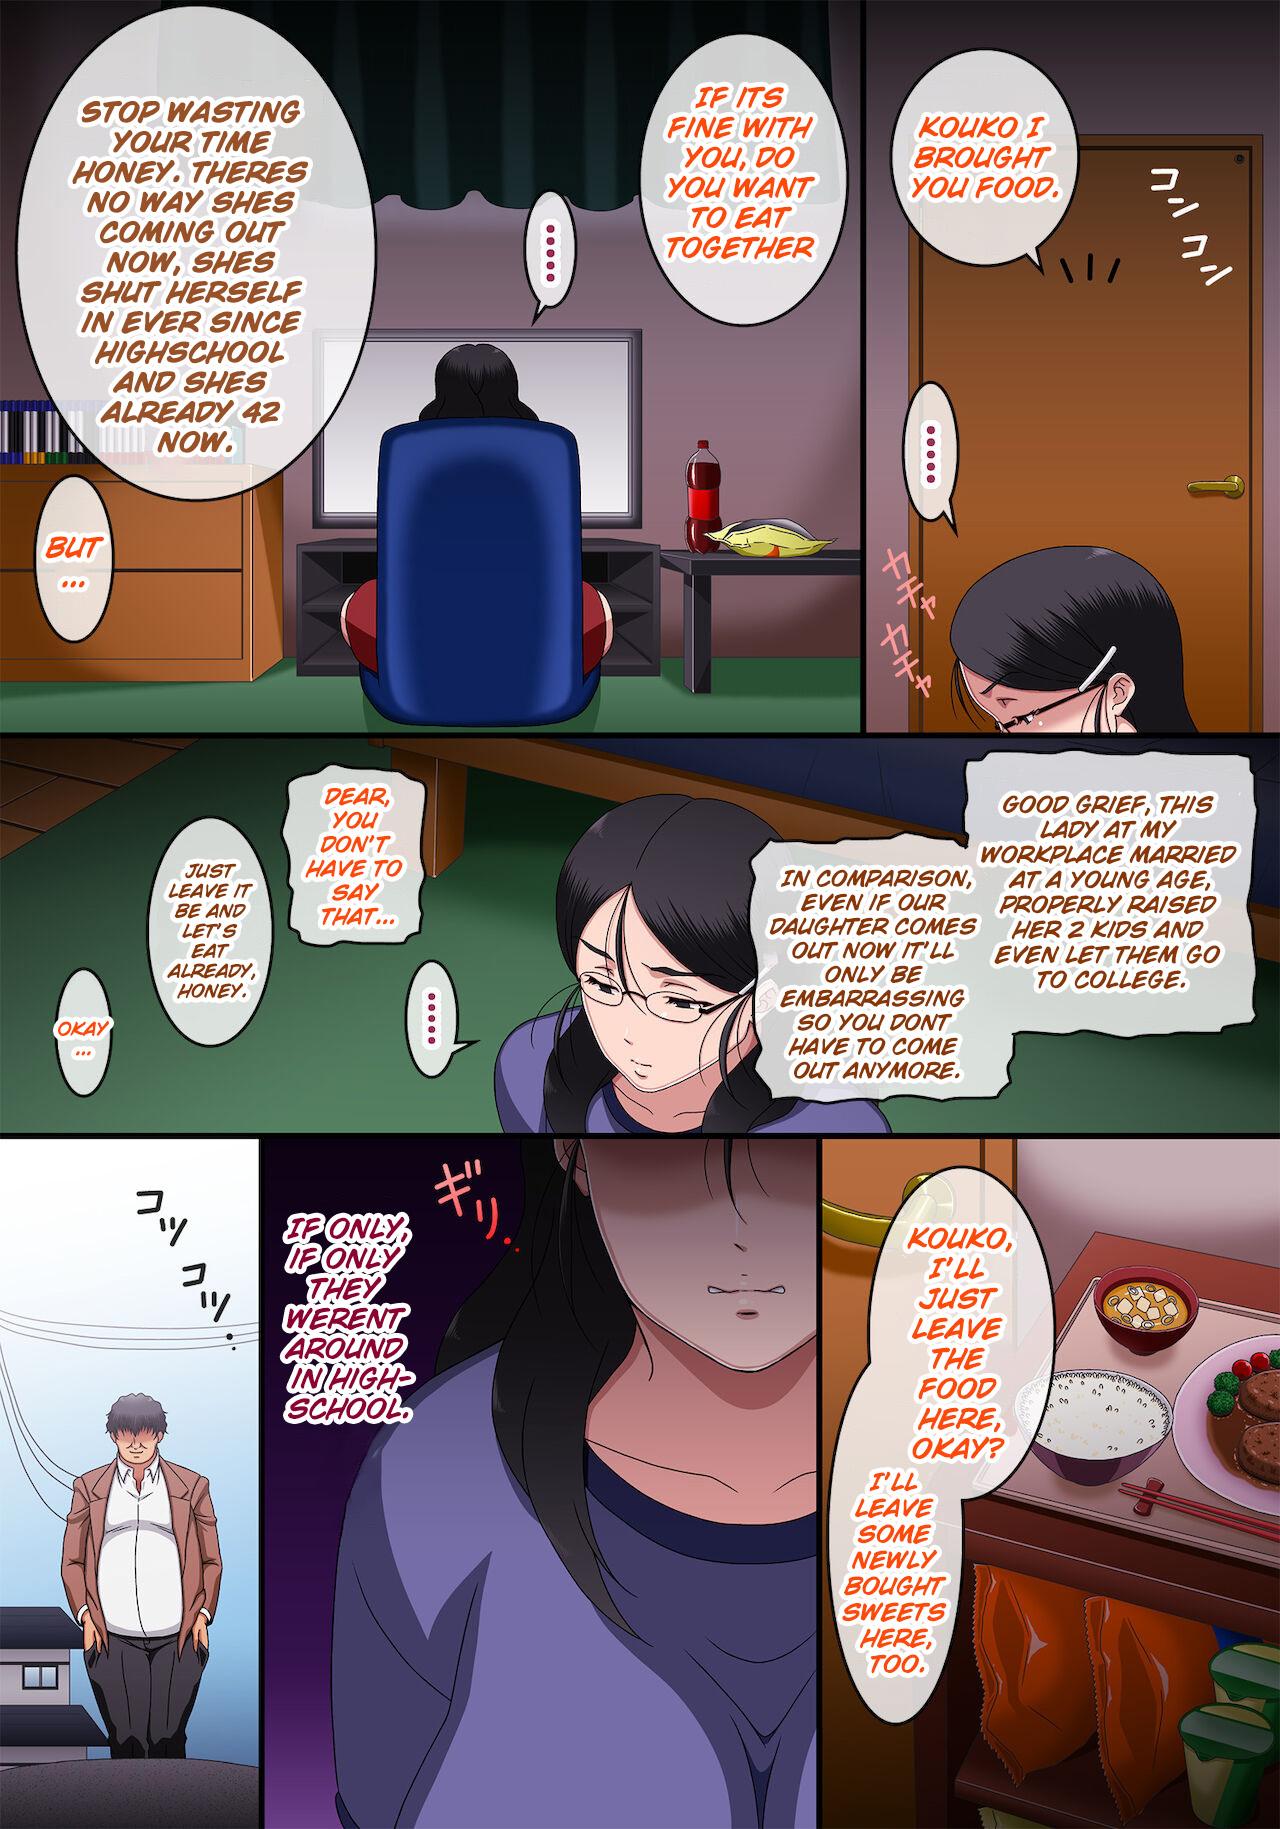 Tiny Something unbelievable happened when I stopped time for 1 month and violated a 42 year old hikikomori woman - Original Lesbian Sex - Page 3